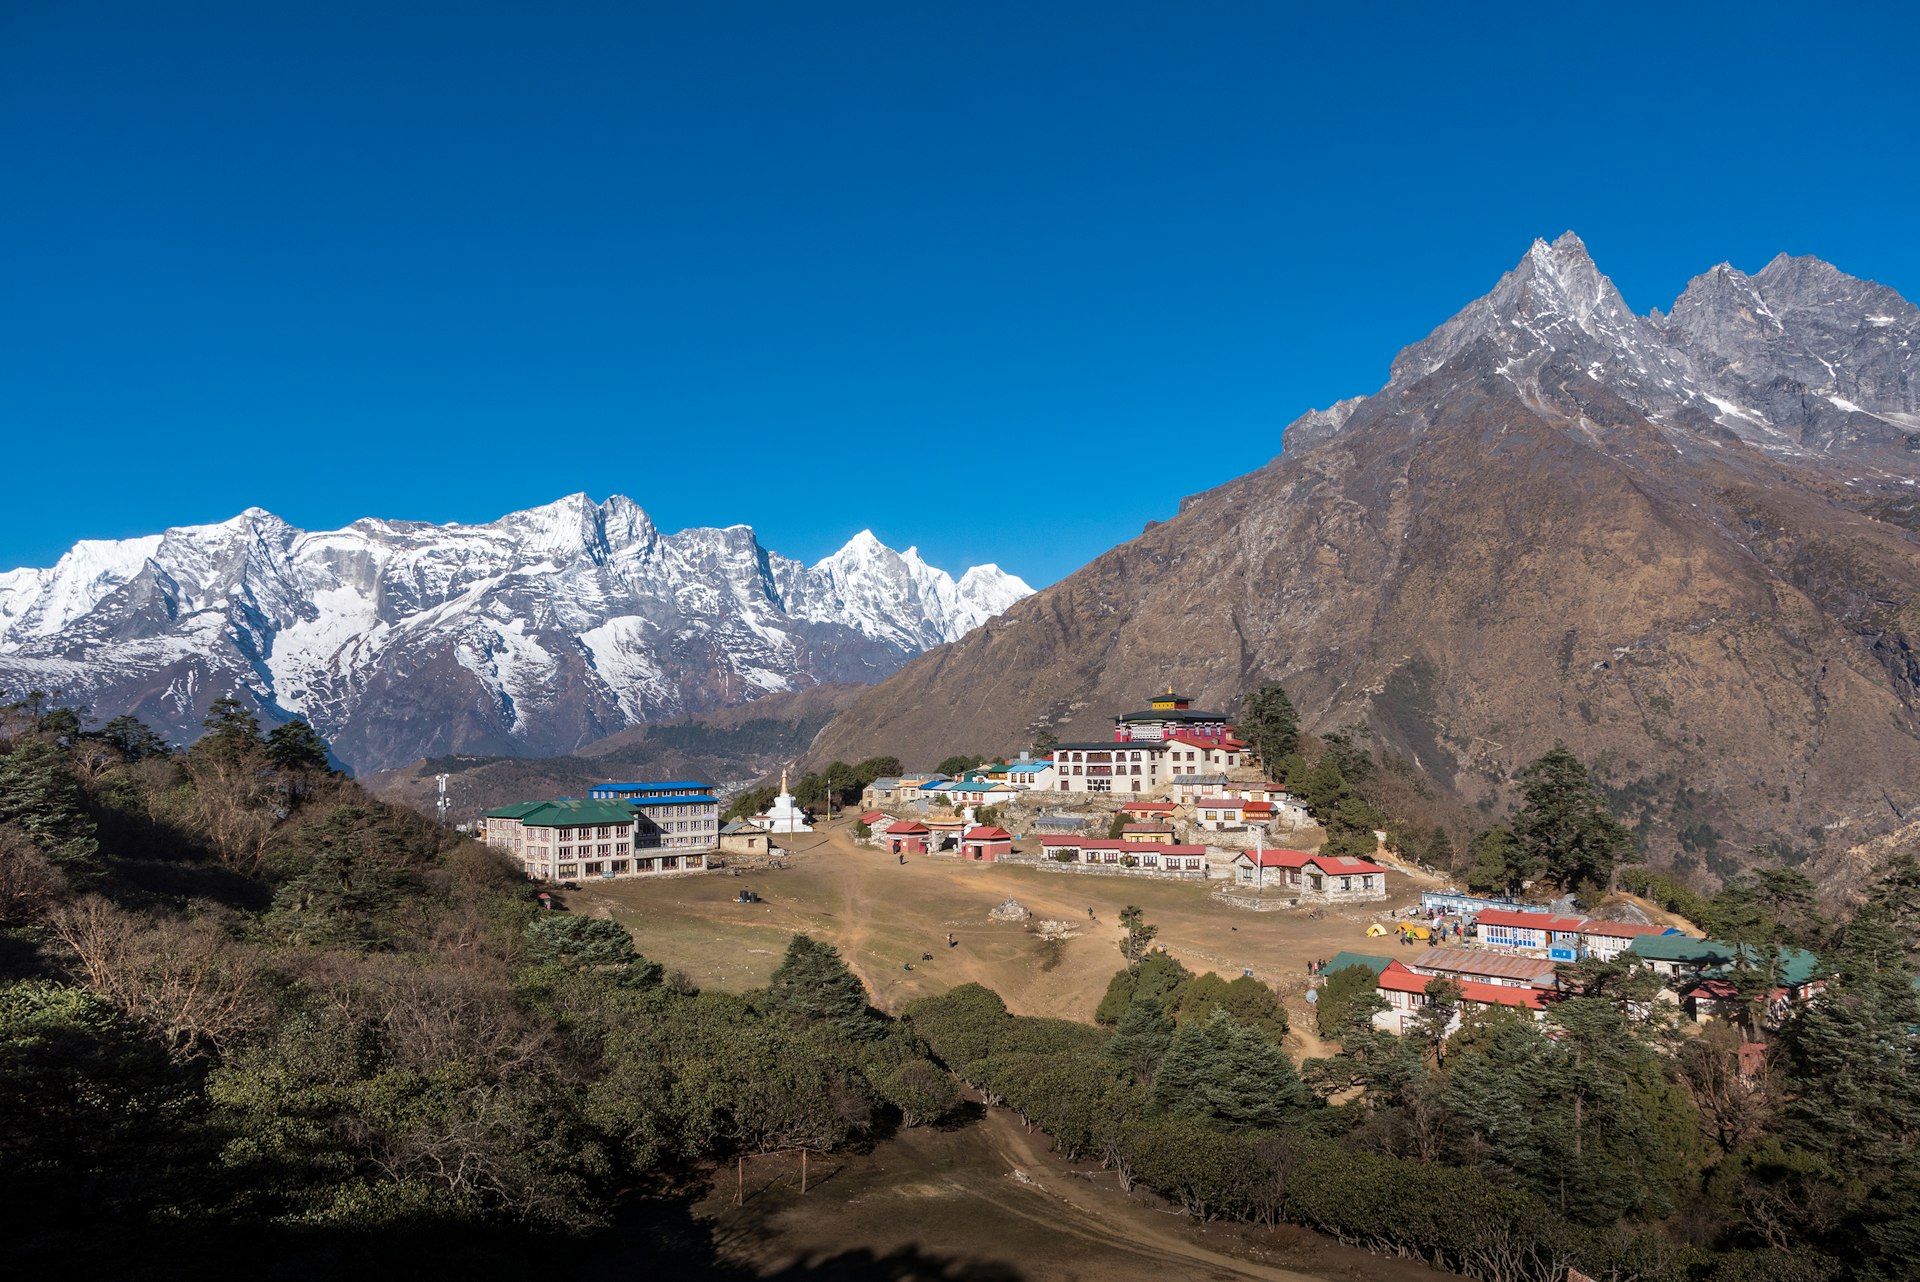 Features - View of Tengboche monastery with Himalayan view in Nepal